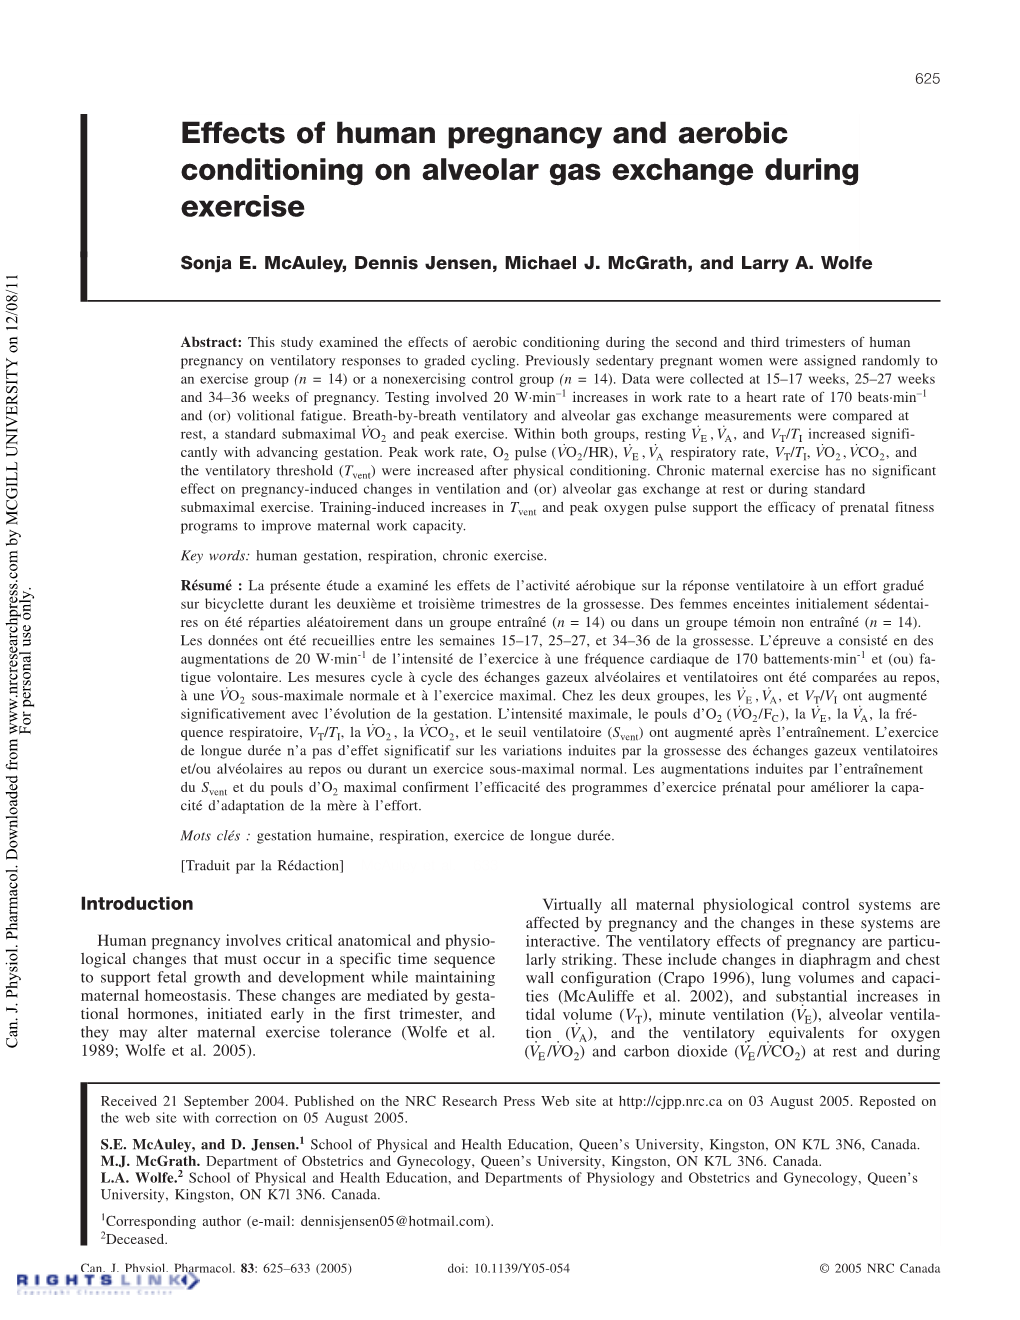 Effects of Human Pregnancy and Aerobic Conditioning on Alveolar Gas Exchange During Exercise